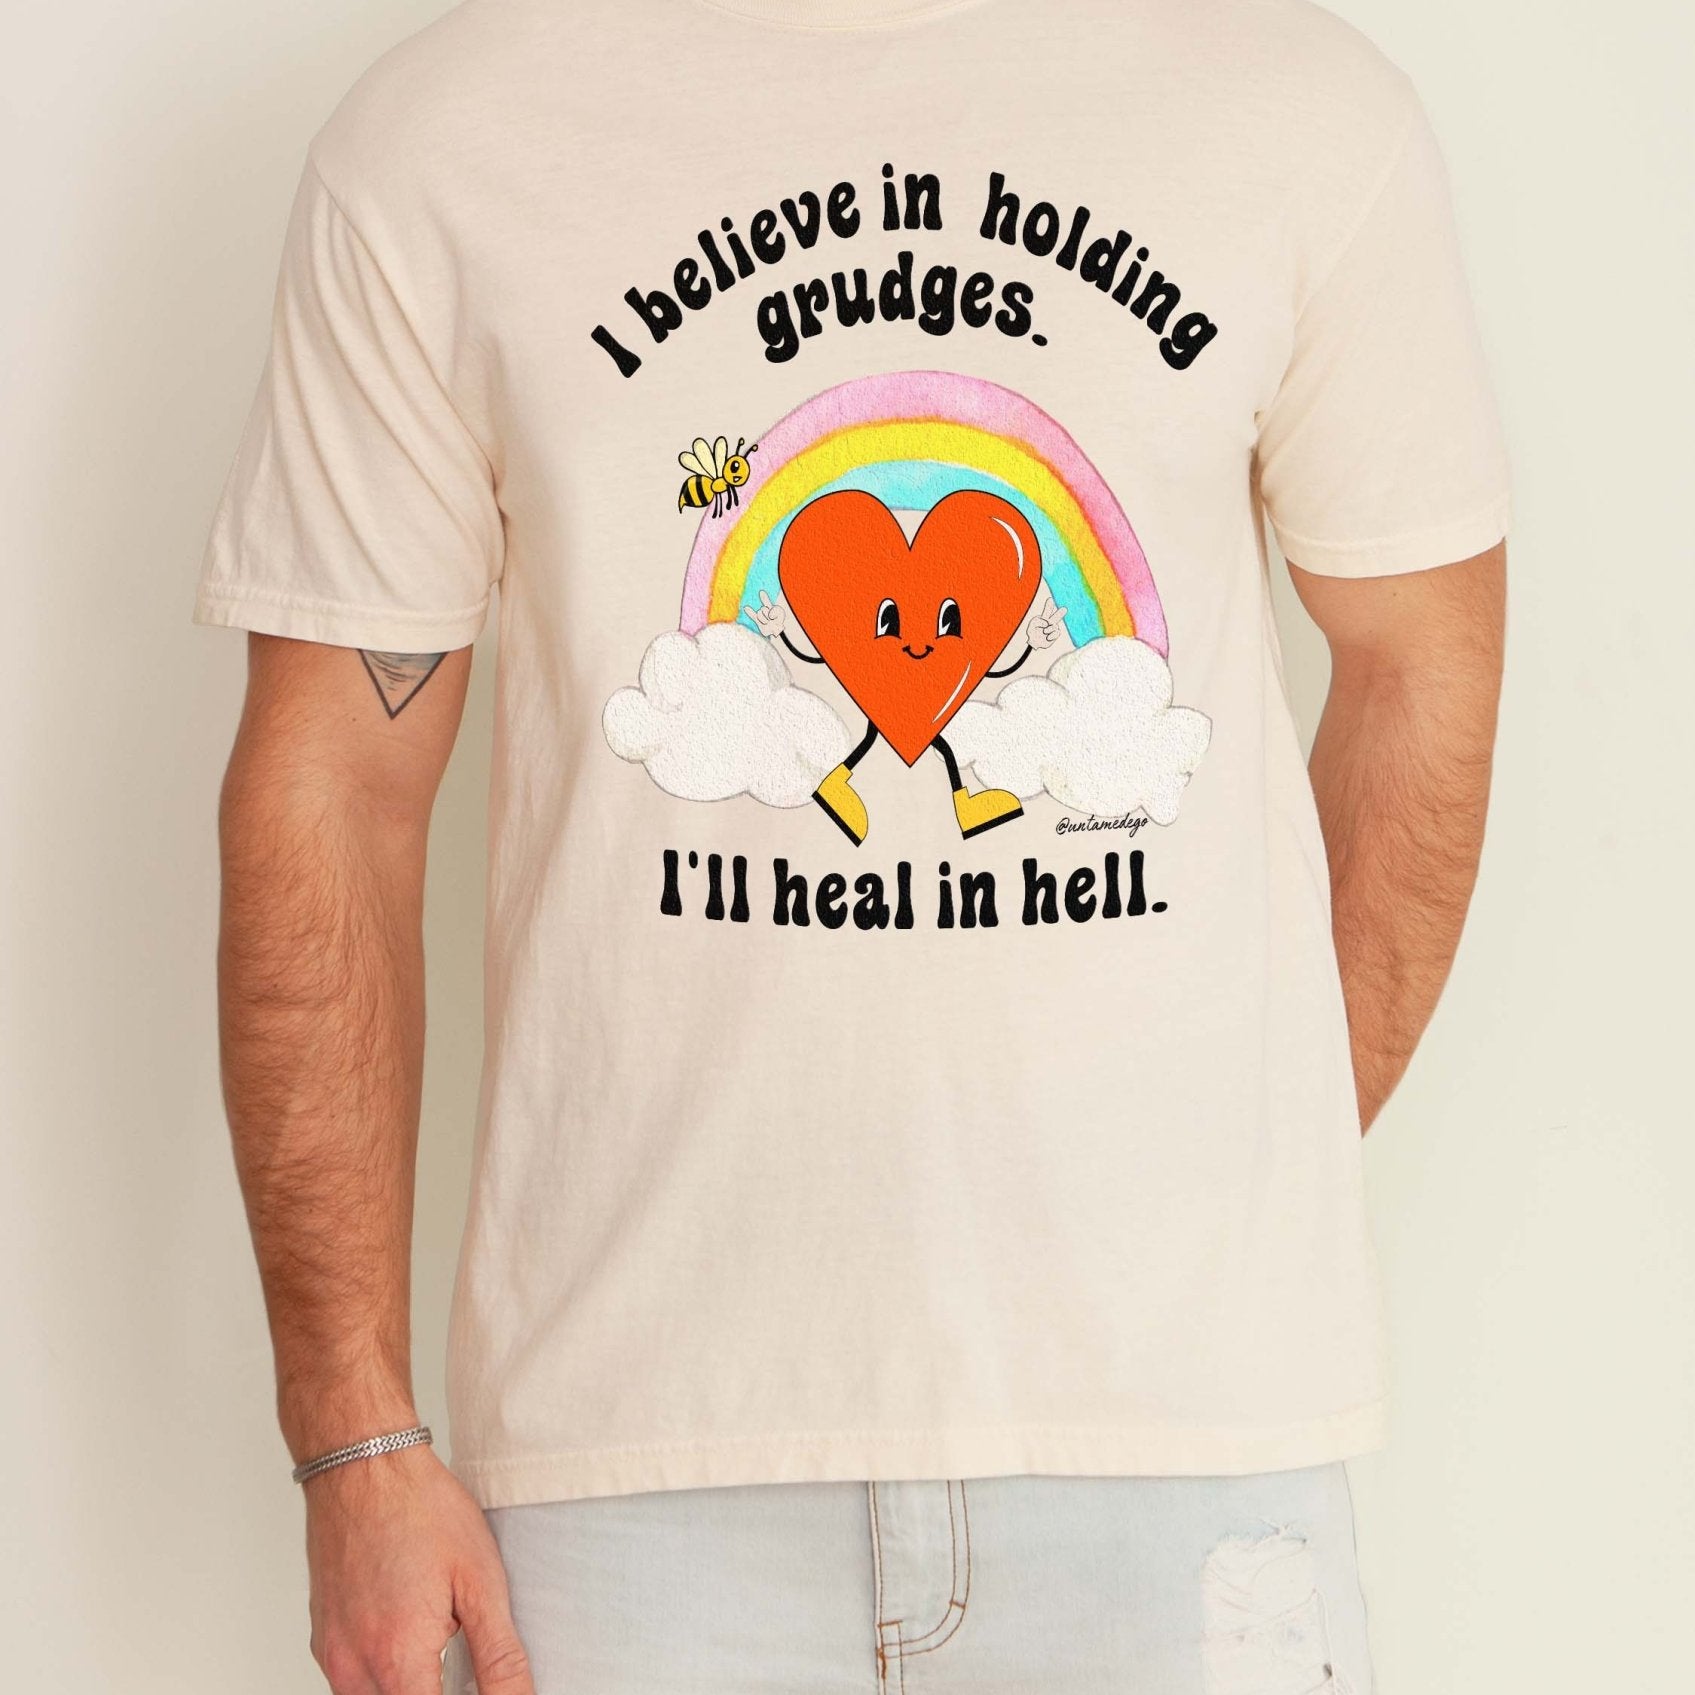 I Believe In Holding Grudges I'll Heal In Hell Men's Tee - UntamedEgo LLC.